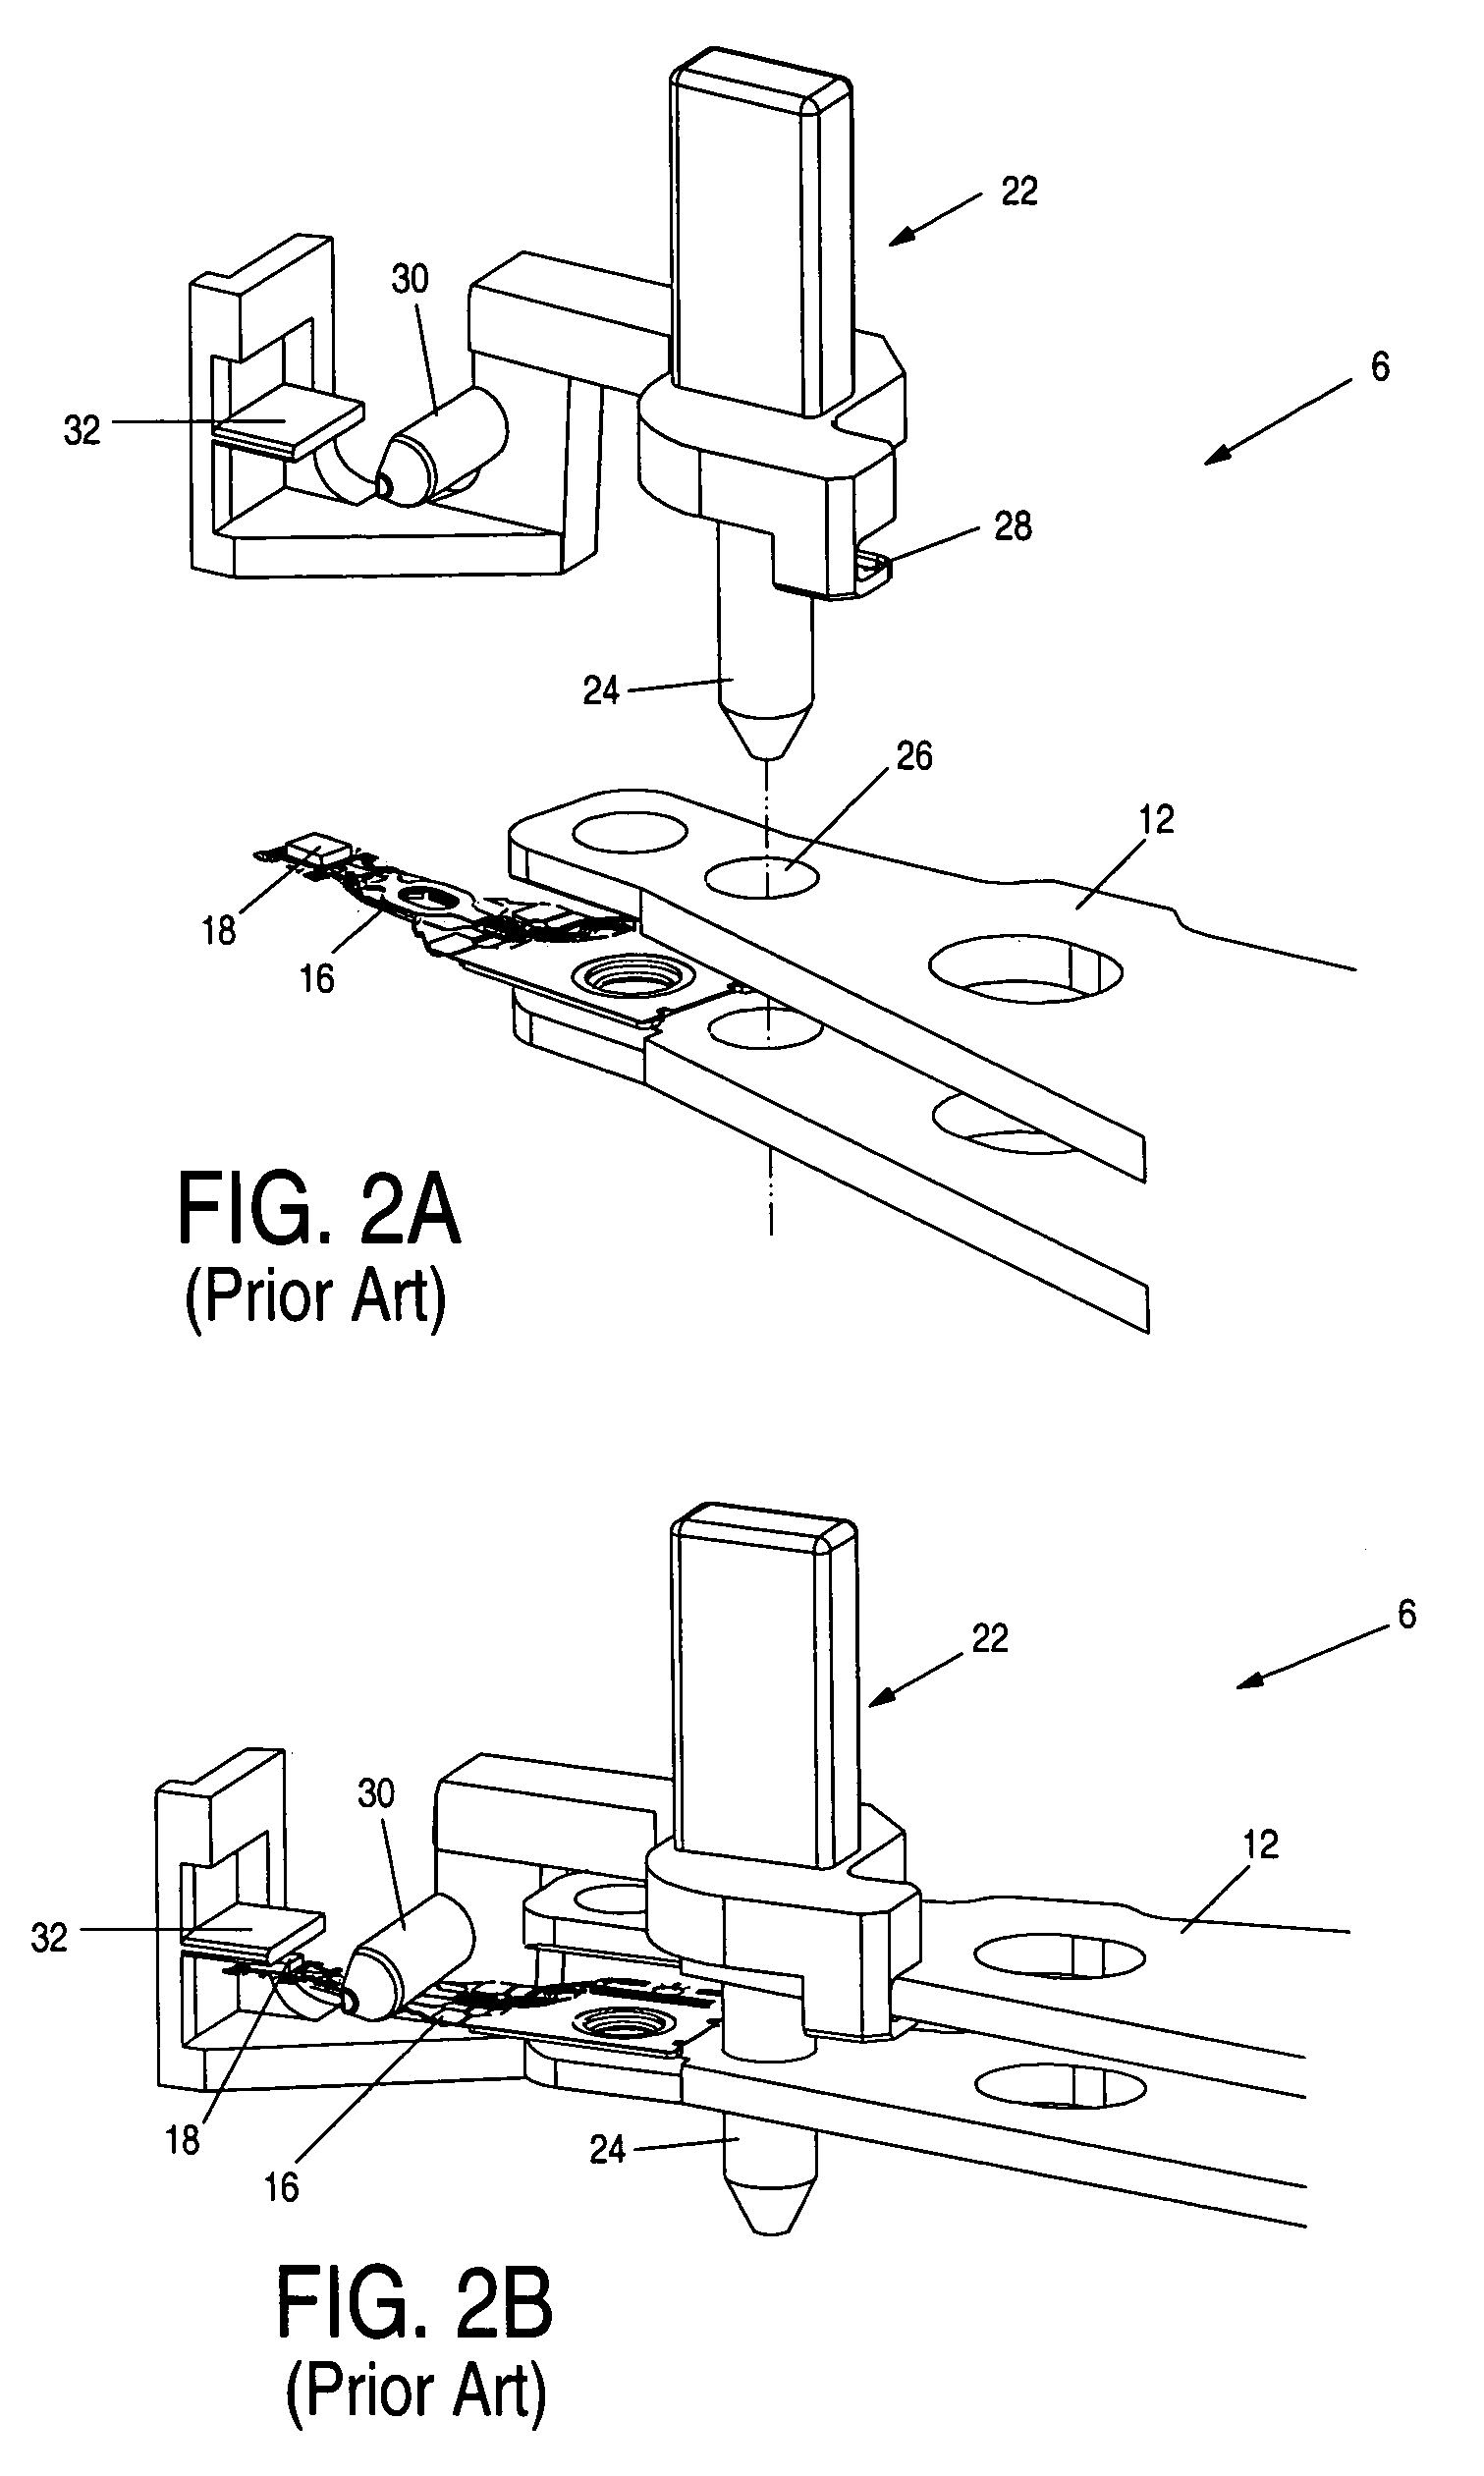 Method of assembling a disk drive including actuating a shipping comb to bend a suspension vertically to facilitate a merge tool